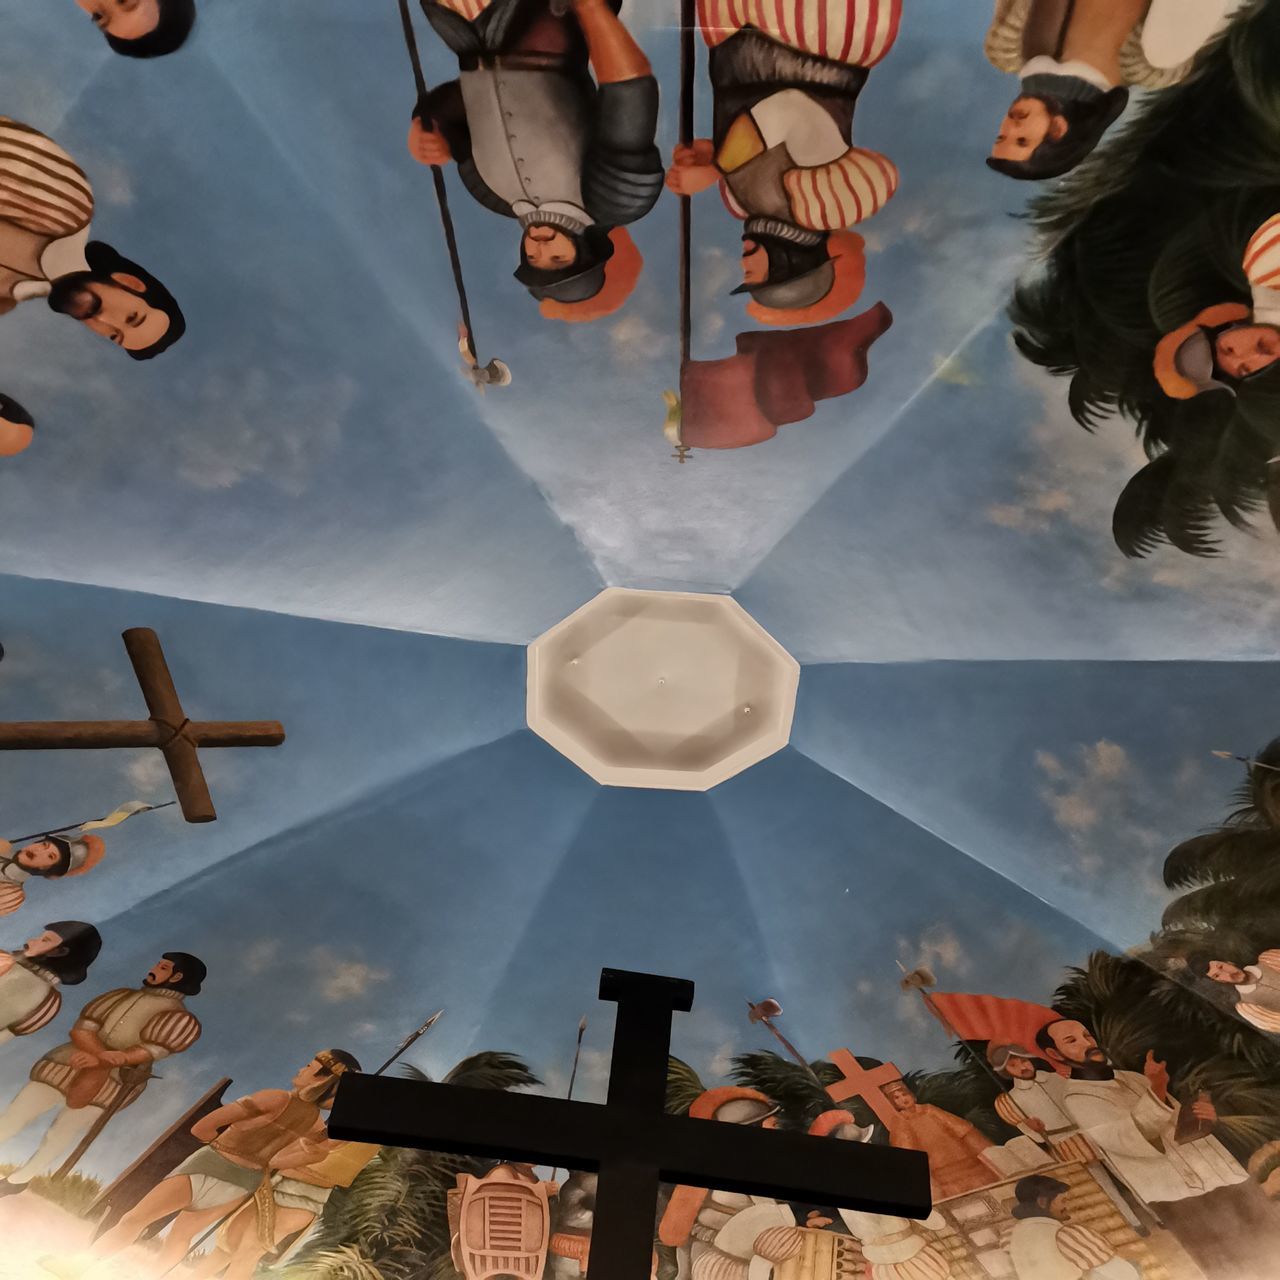 screenshot, sky, group of people, architecture, religion, adult, men, belief, nature, indoors, cartoon, high angle view